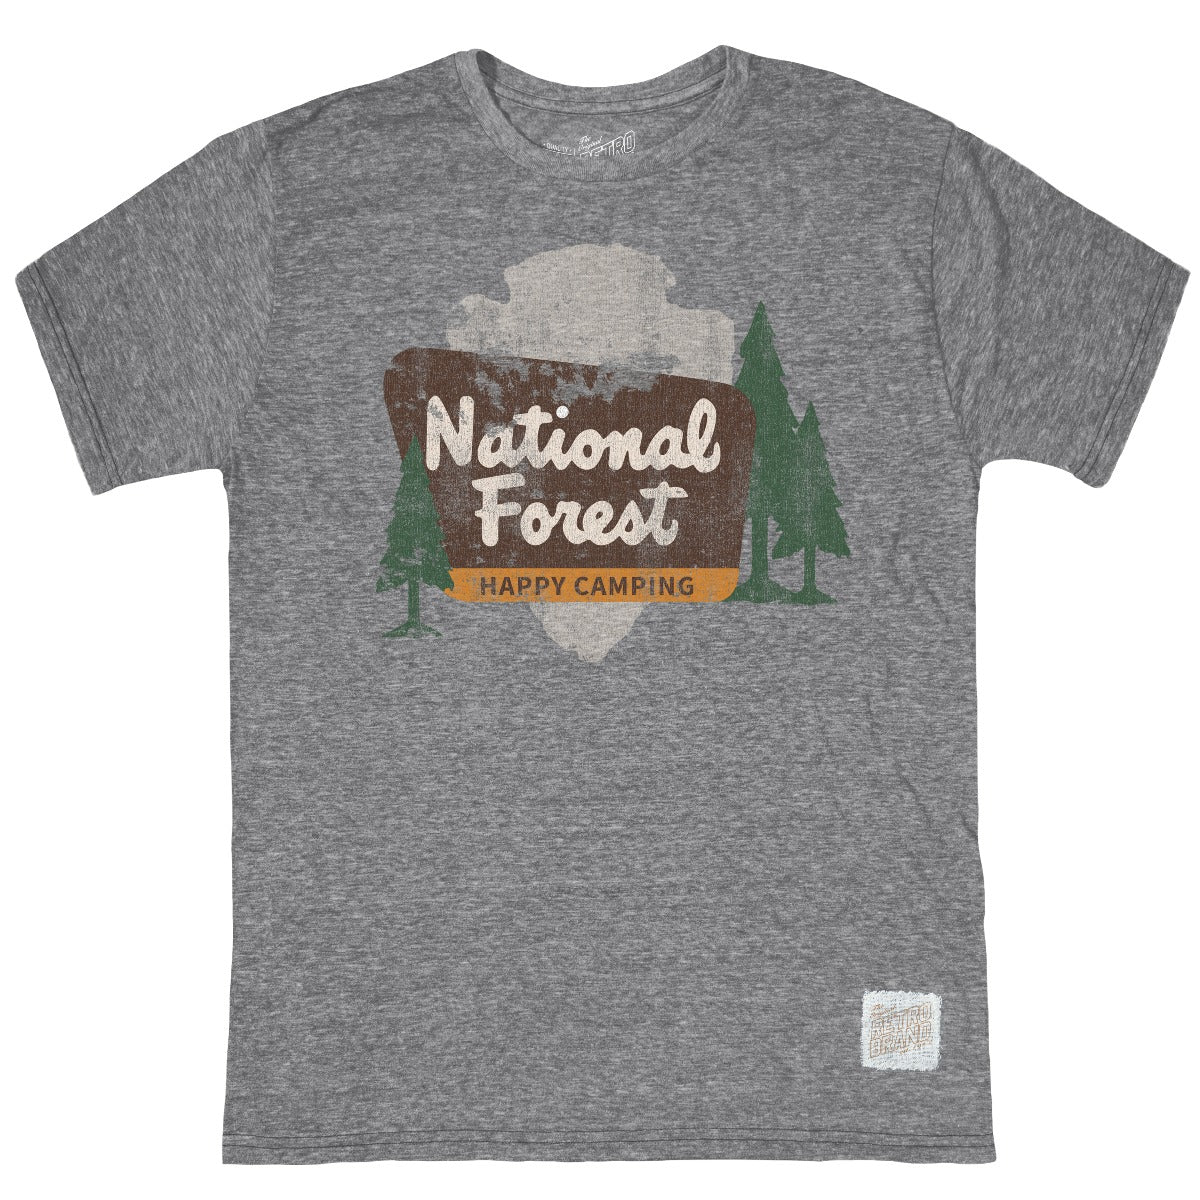 National Forest Happy Camping sign on light gray arrowhead and three pine trees on our streaky gray tri-blend unisex tee.